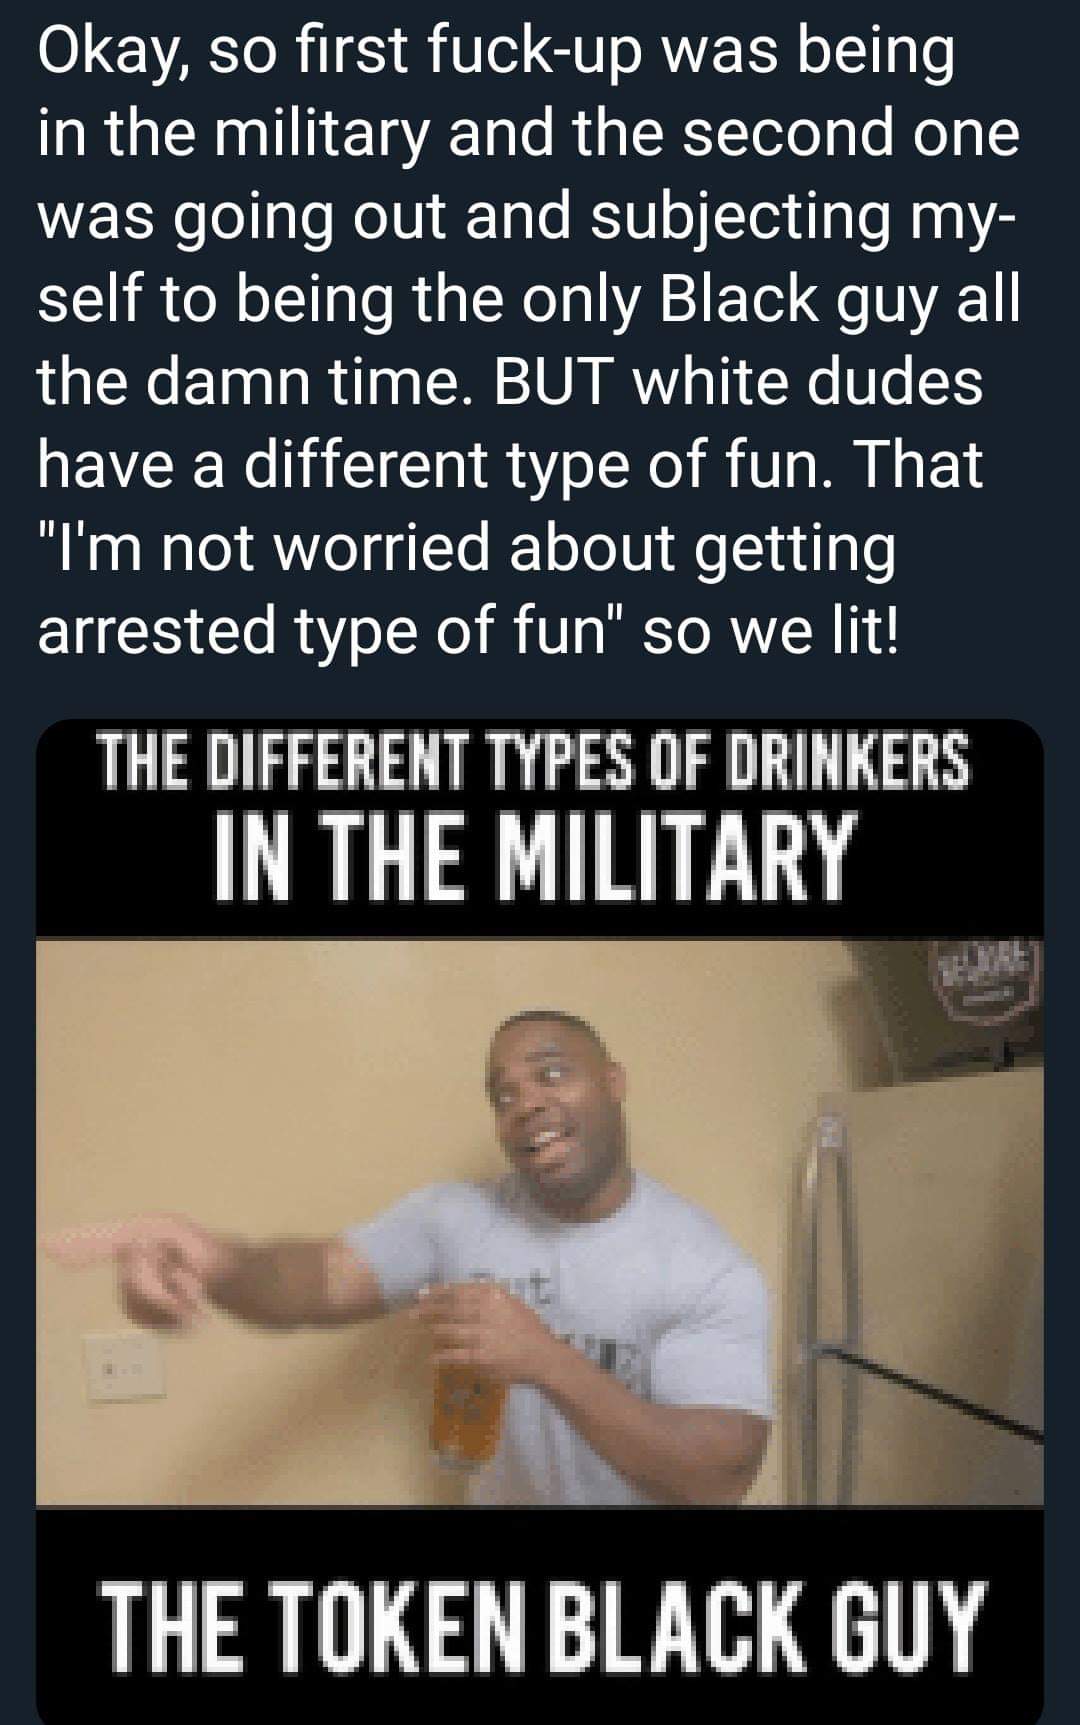 photo caption - Okay, so first fuckup was being in the military and the second one was going out and subjecting my self to being the only Black guy all the damn time. But white dudes have a different type of fun. That "I'm not worried about getting arrest